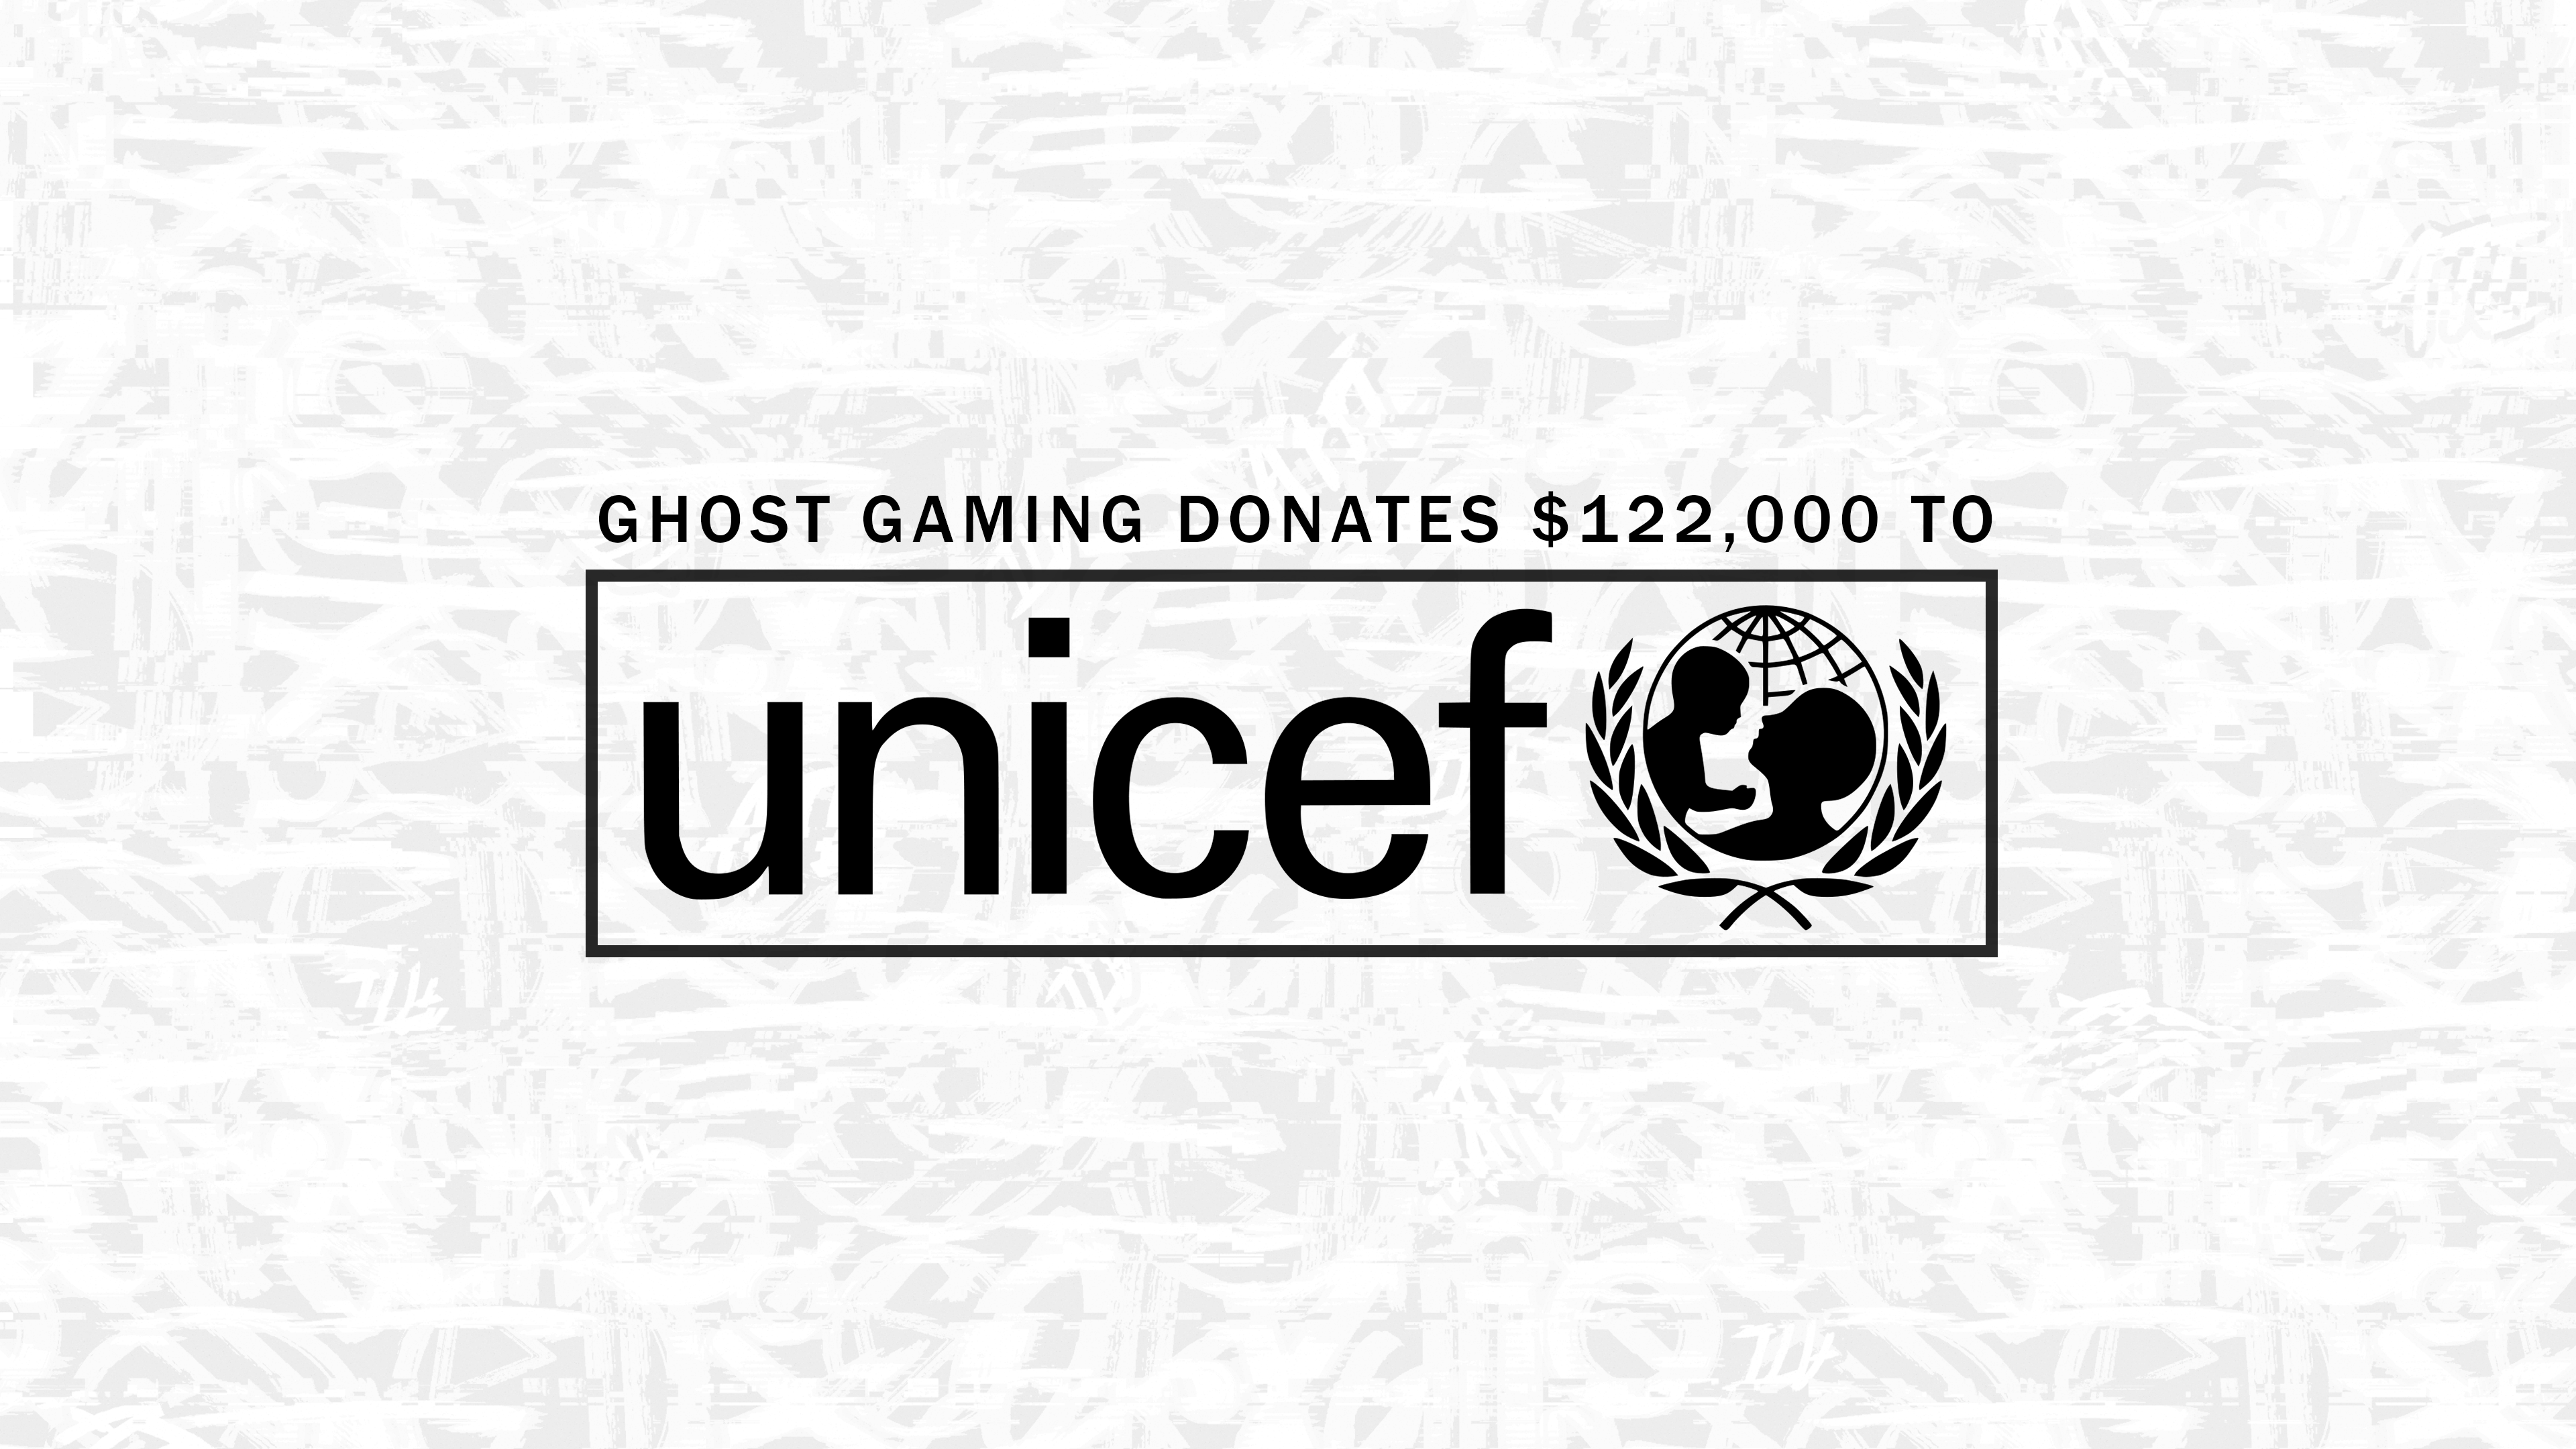 Ghost Gaming donates $122k to Unicef